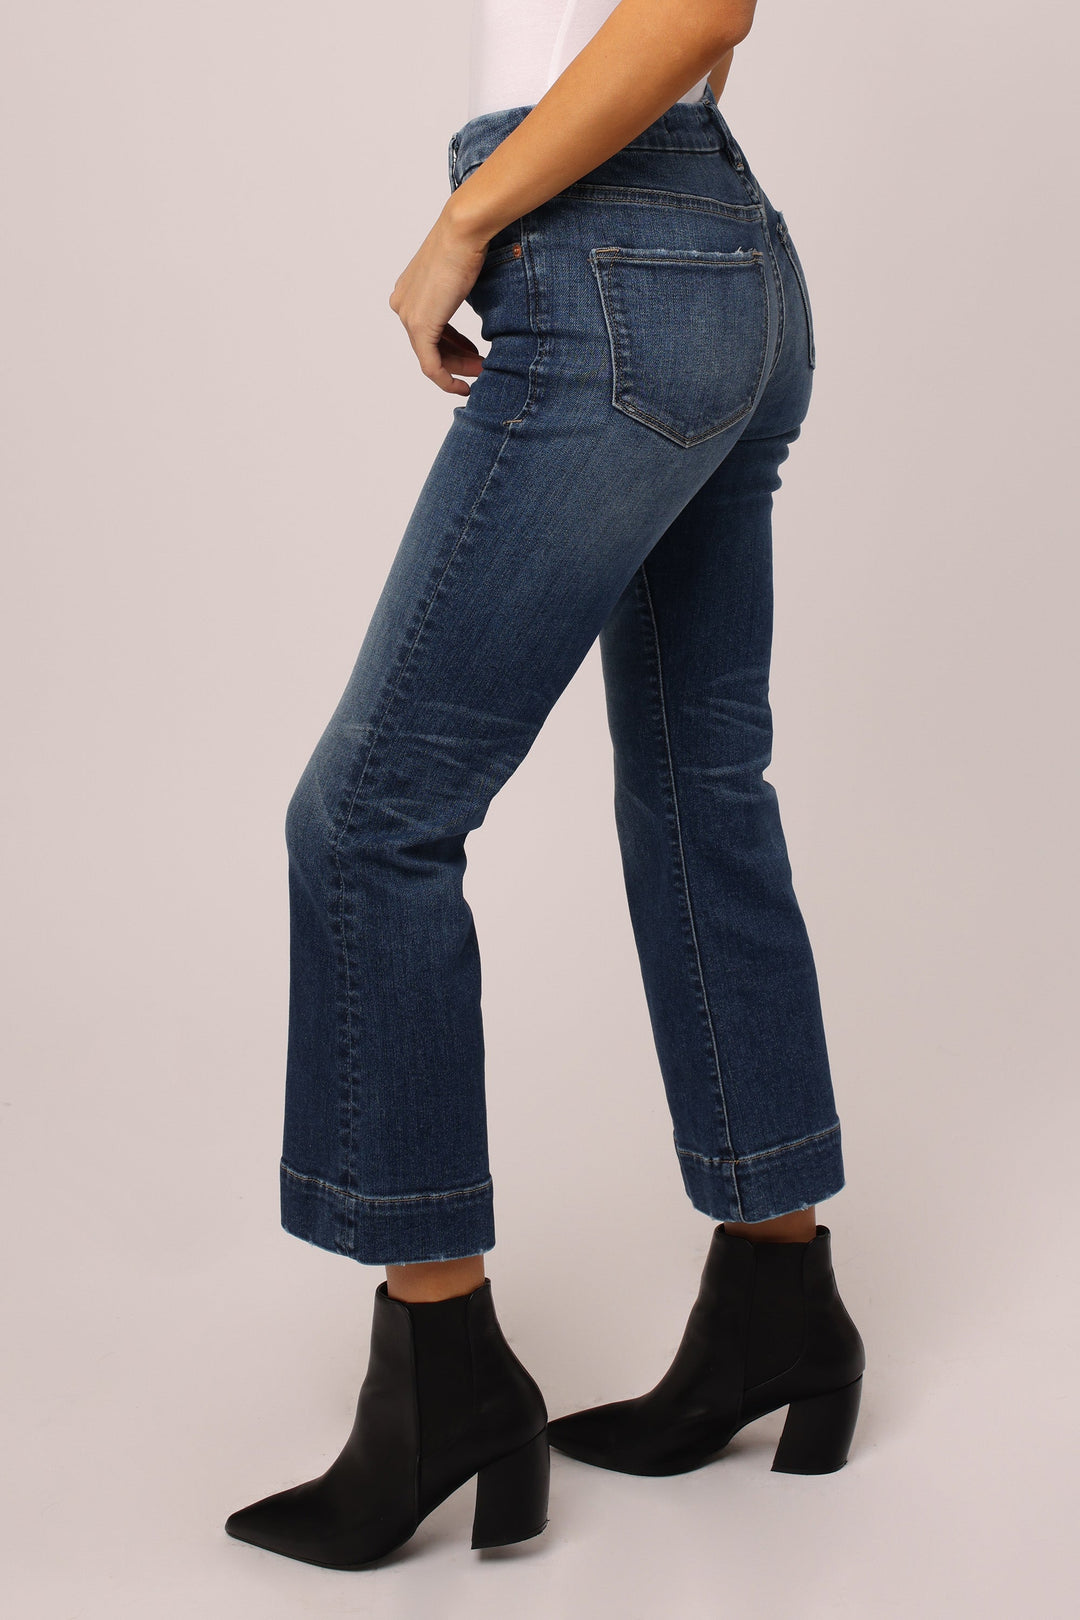 image of a female model wearing a JEANNE SUPER HIGH RISE FLARE JEANS SONOMA JEANS